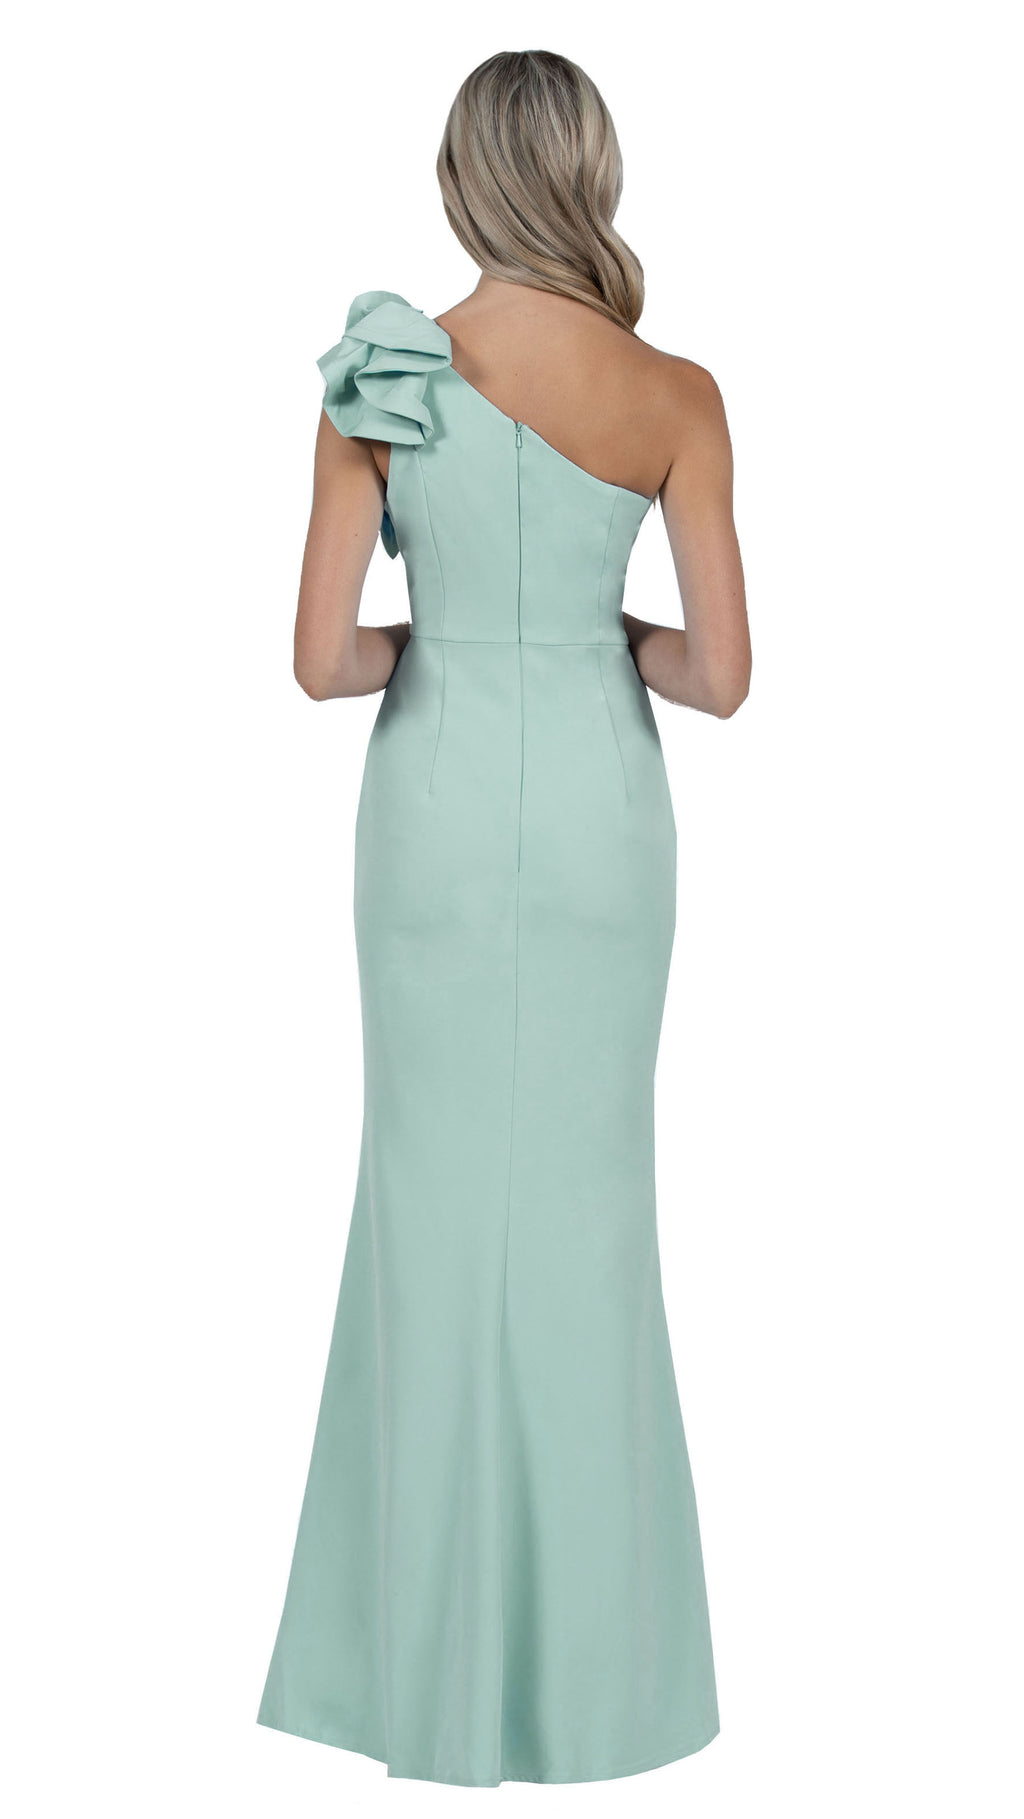 Sue Frill Gown in Soft Sage BACK